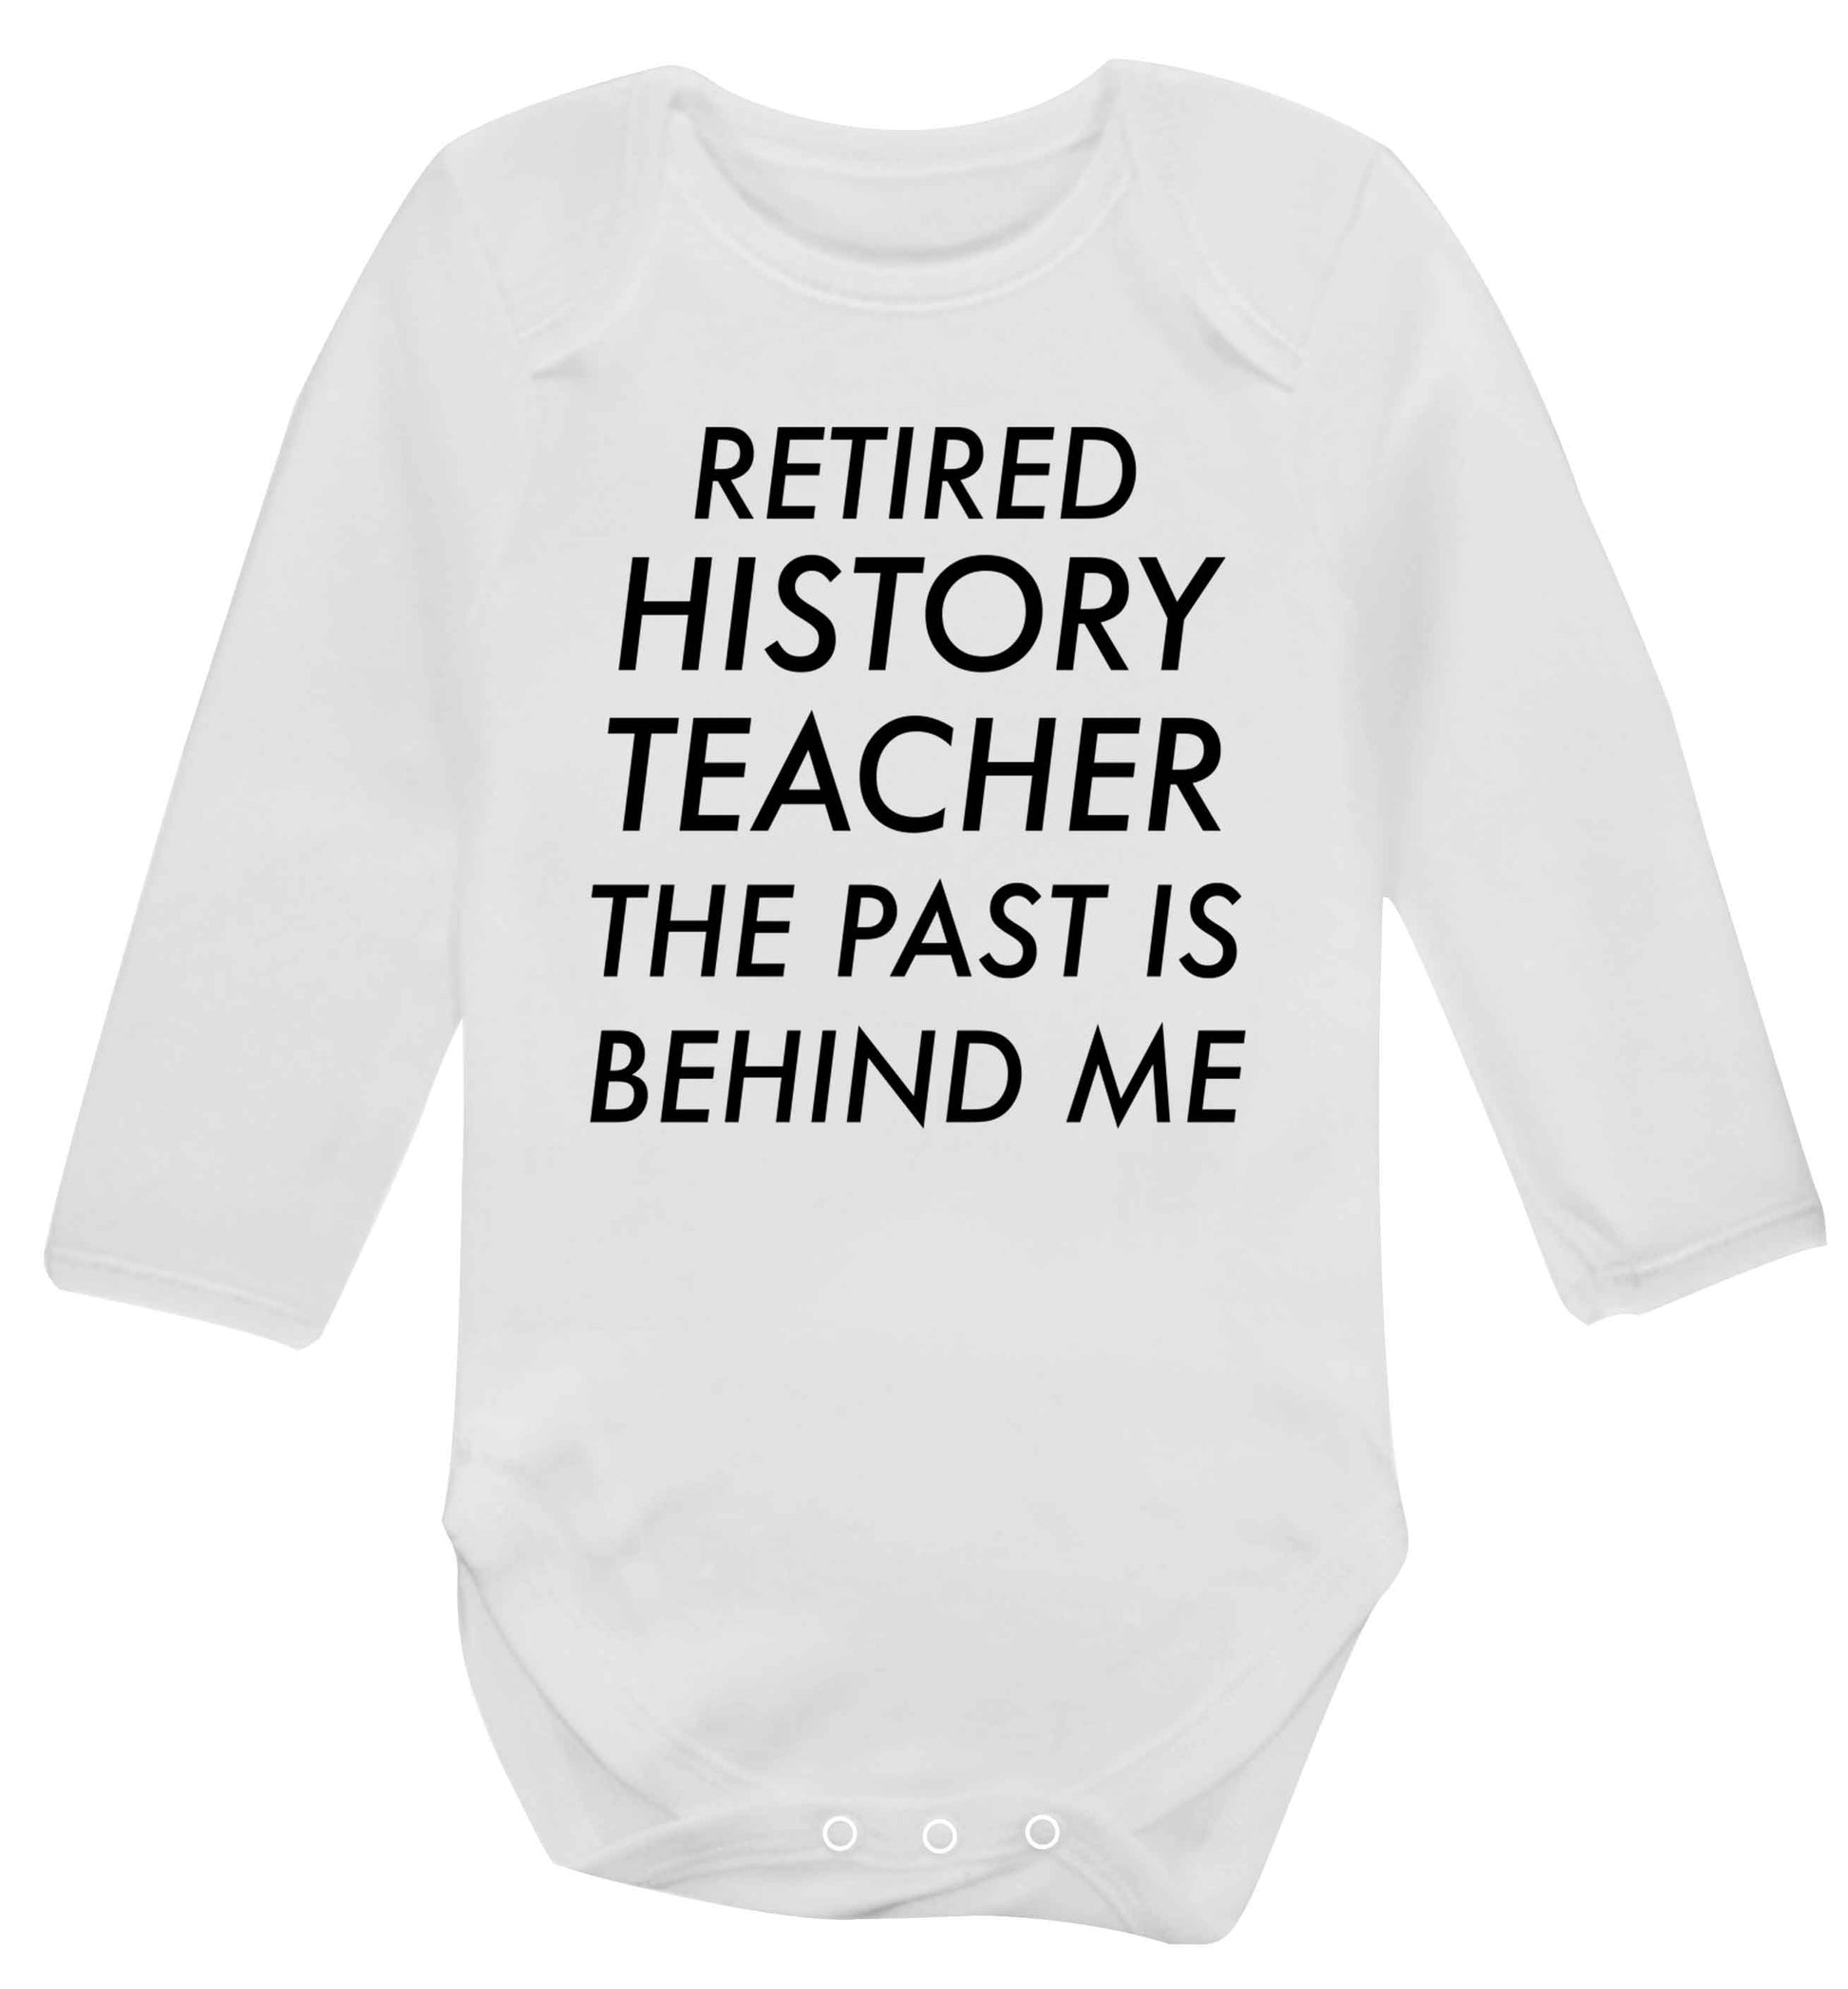 Retired history teacher the past is behind me Baby Vest long sleeved white 6-12 months